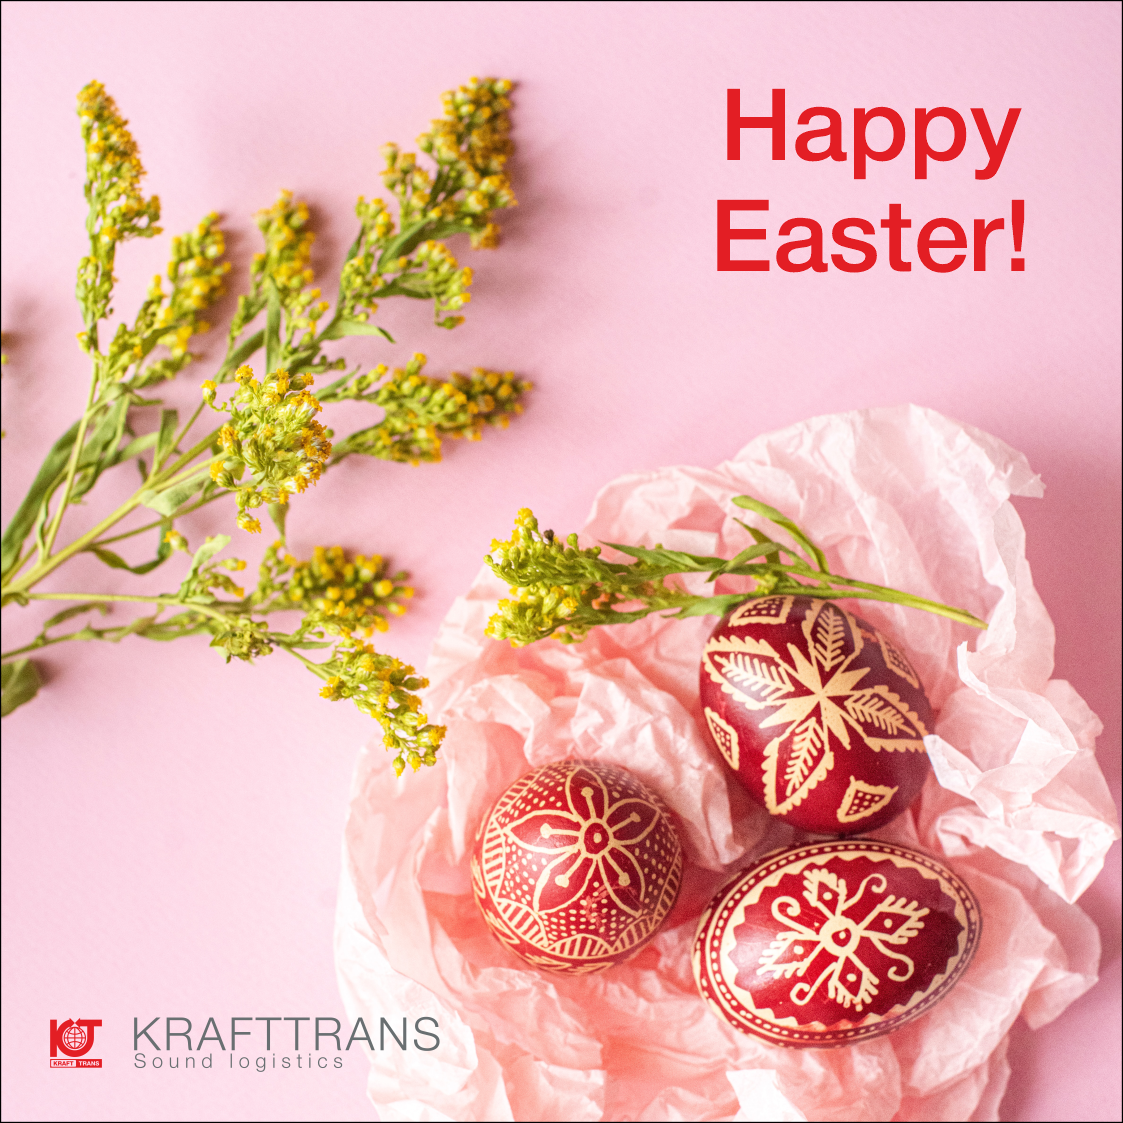 Happy Easter from KRAFTTRANS logistics